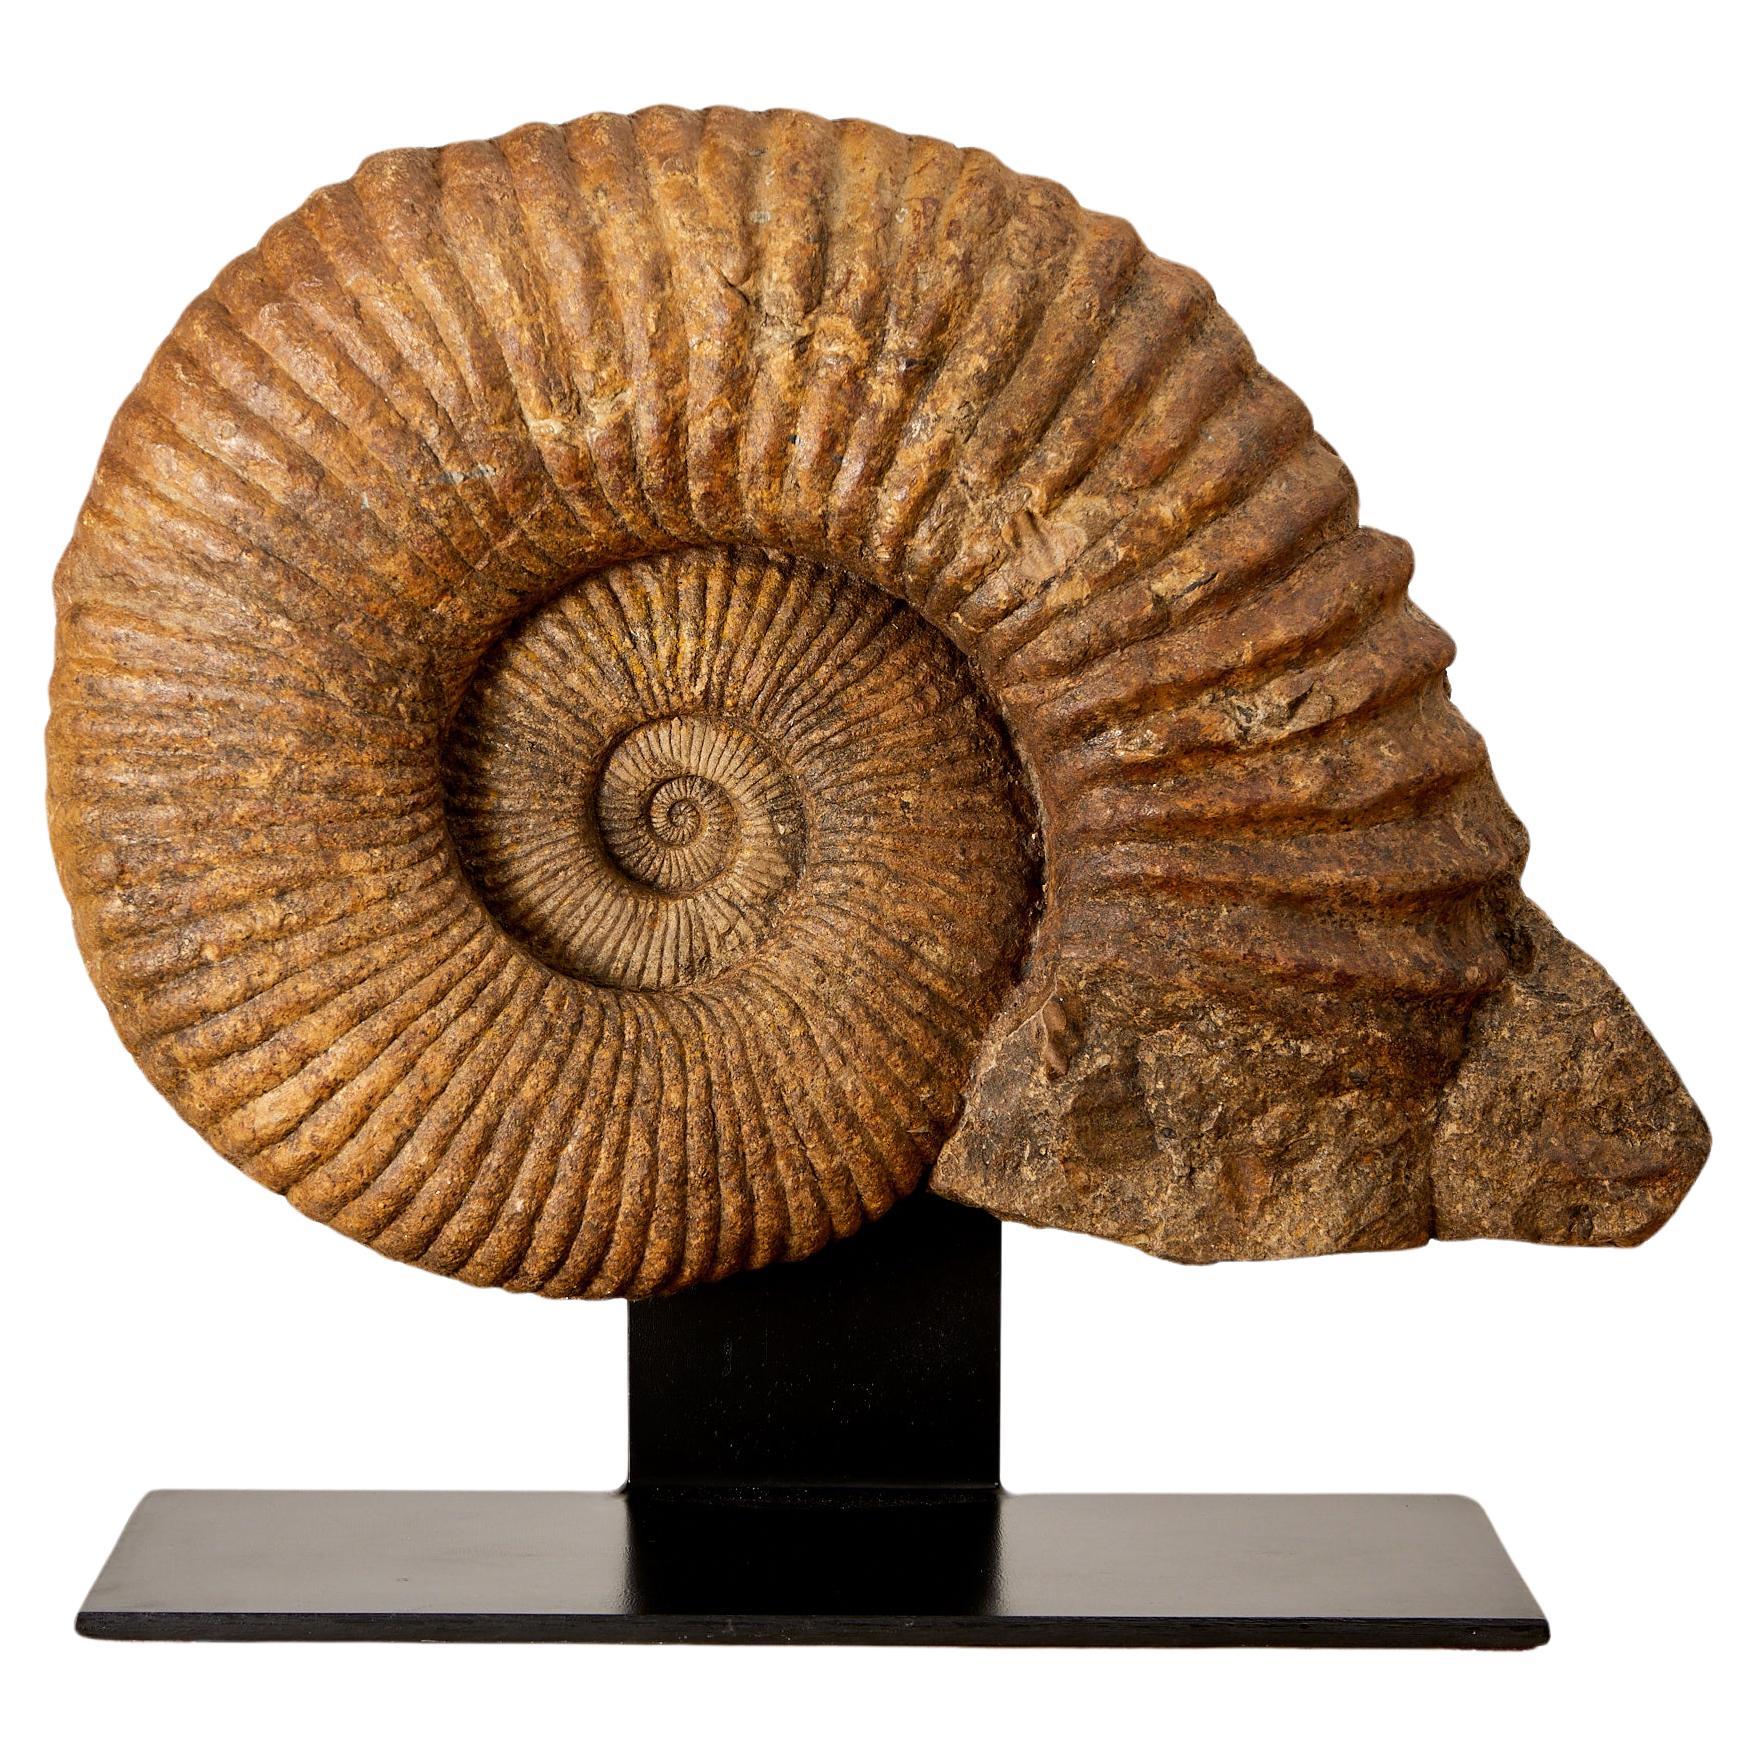 Magnificent fossil, ammonite, approximately 335 million years of existence.